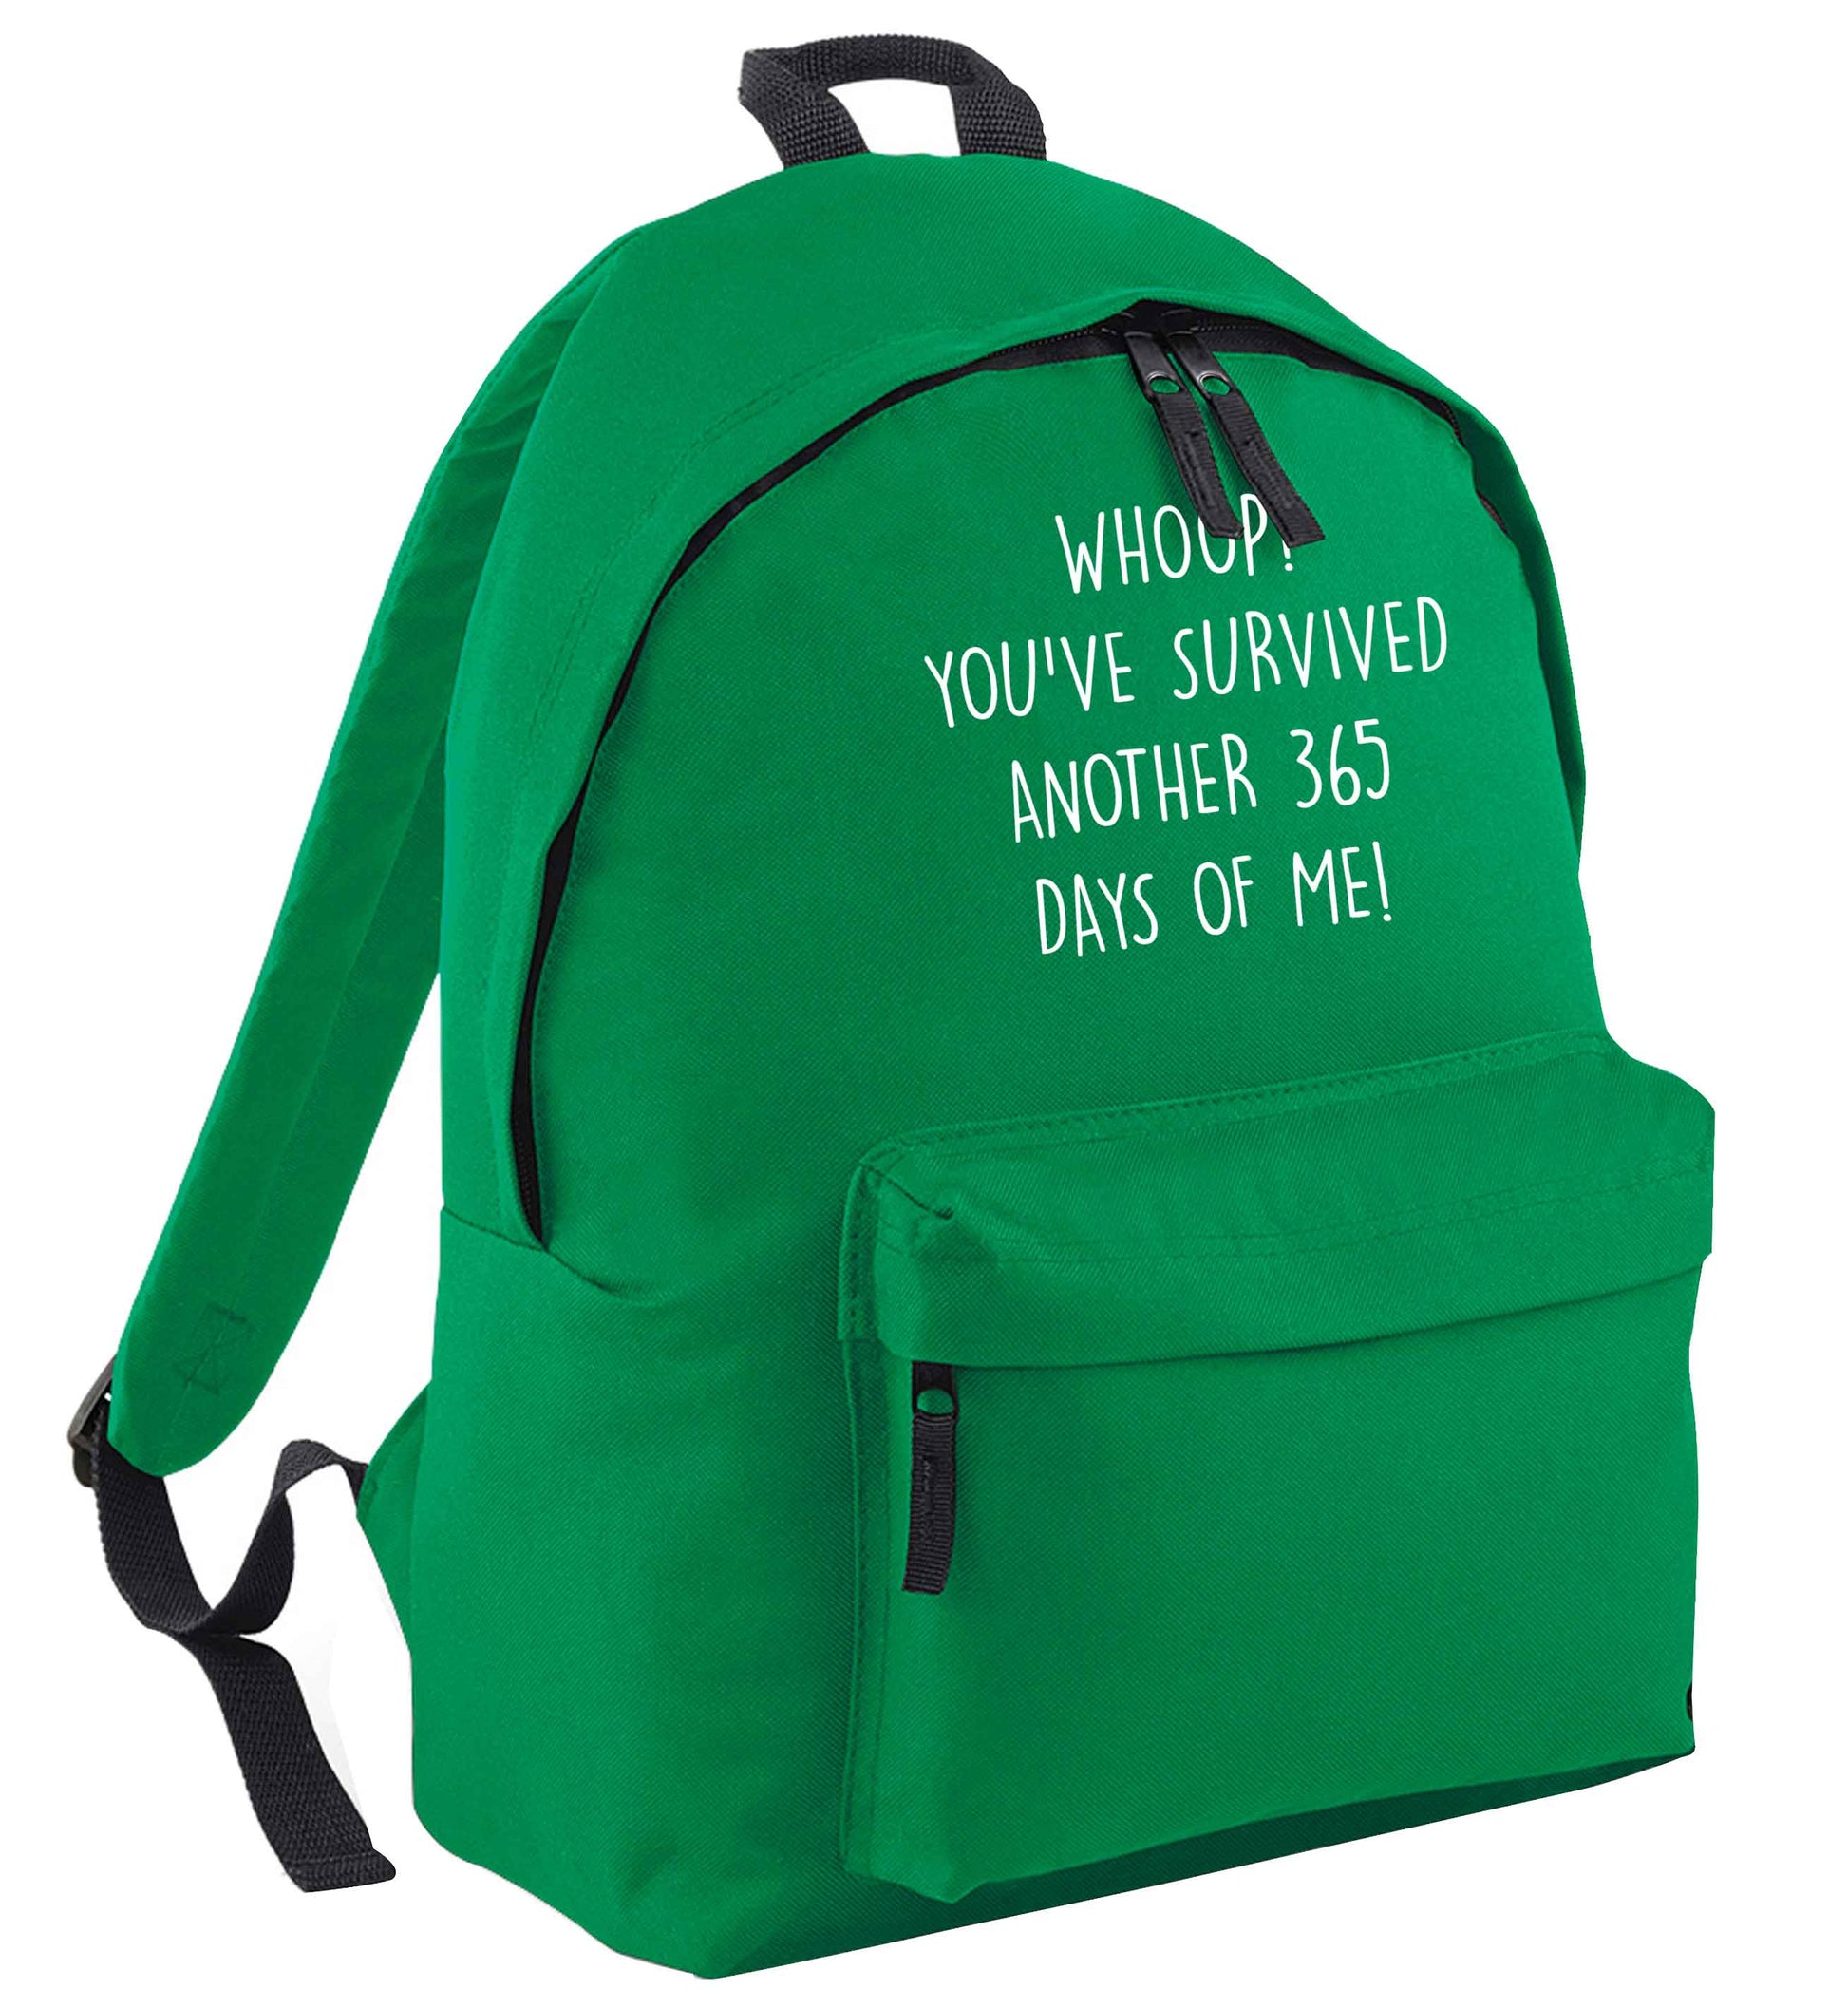 Whoop! You've survived another 365 days with me! green adults backpack